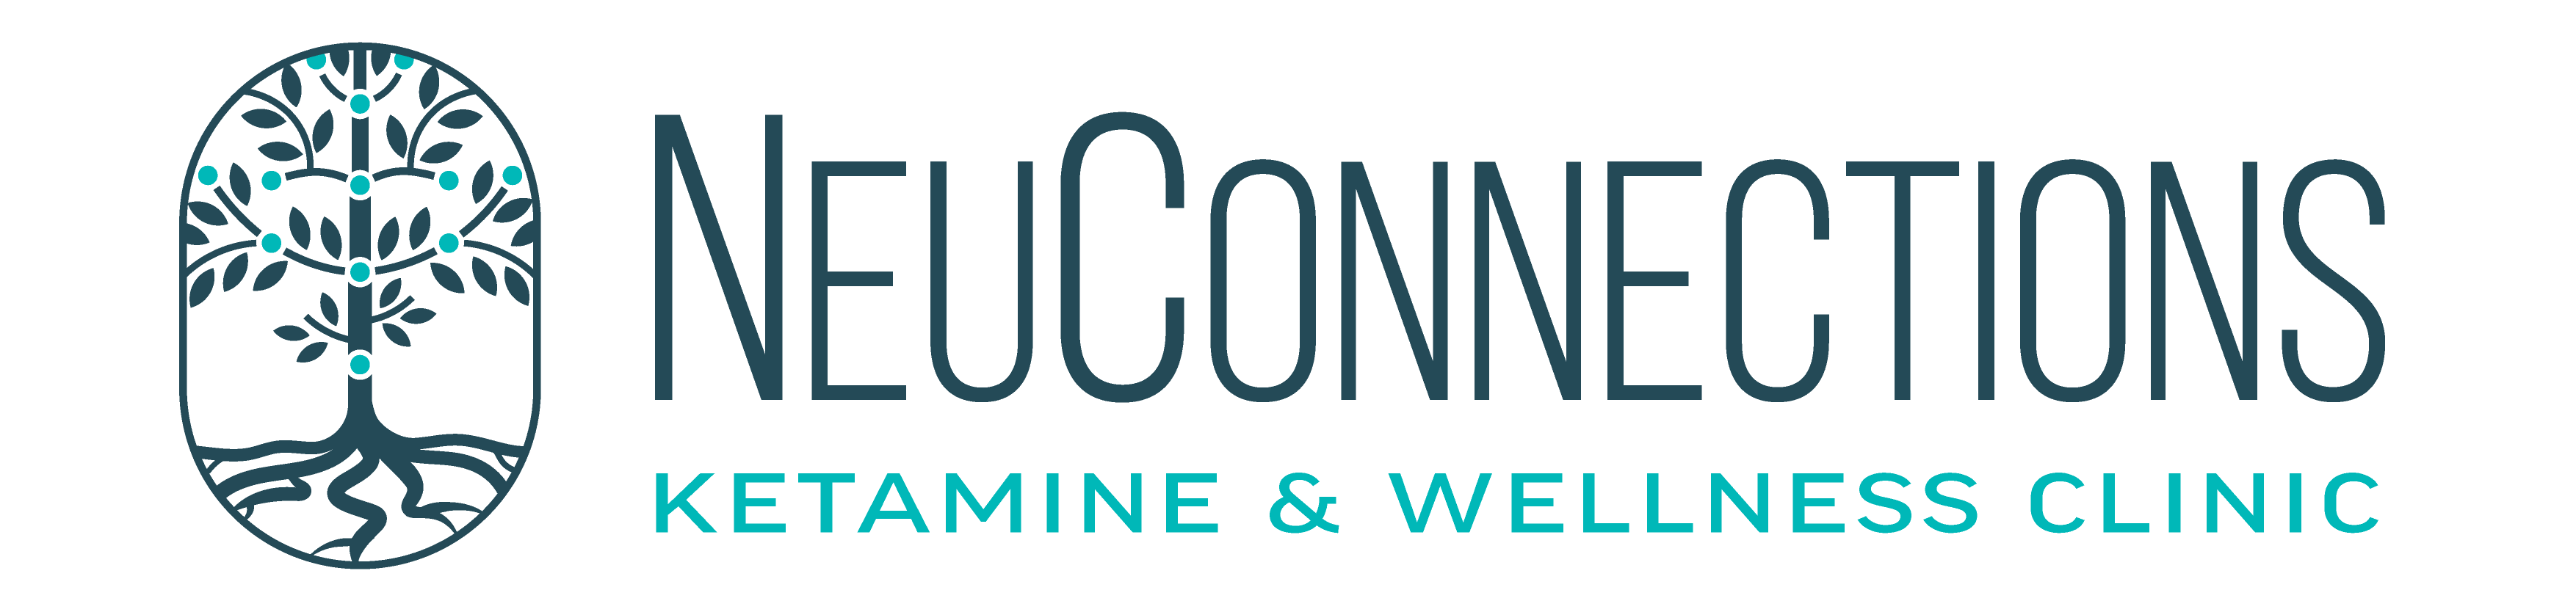 NeuConnections Ketamine & Wellness Clinic Expands Infusion Treatment for Depression, Chronic Pain, and other Disorders to Denver, Colorado